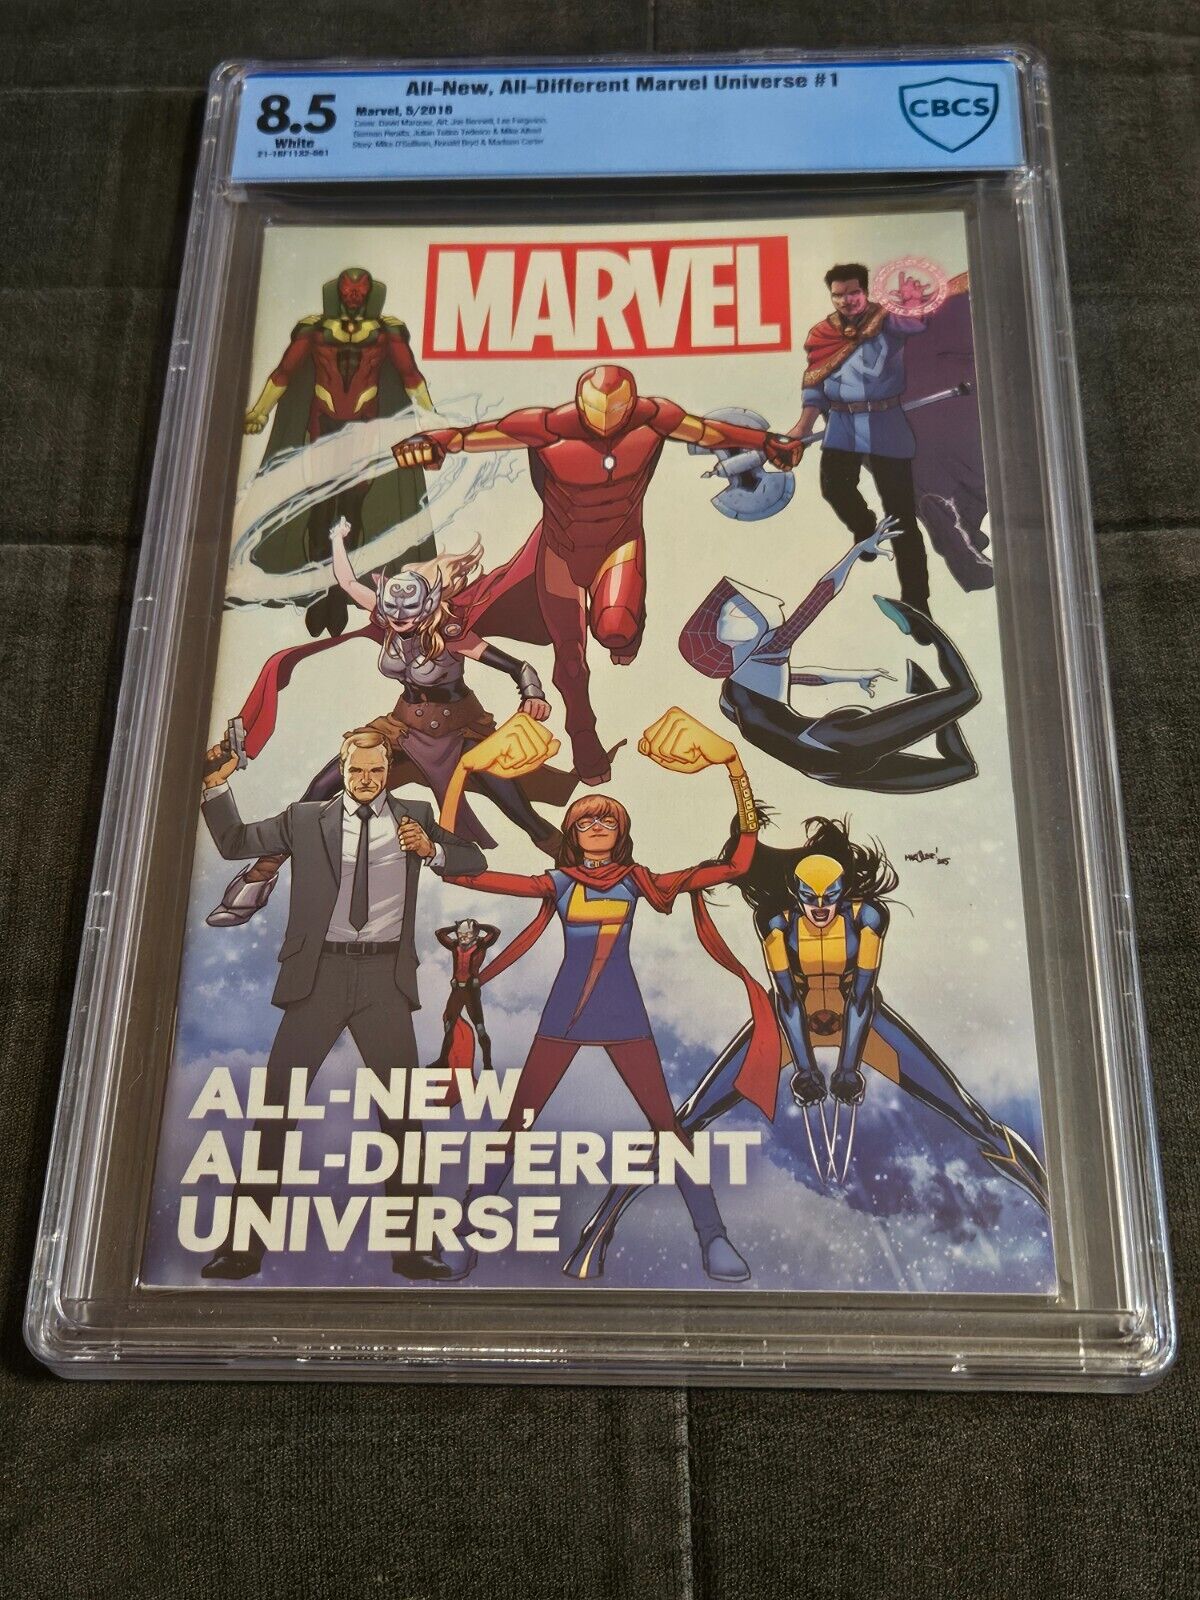 All-New, All-Different Marvel Universe #1 Cbcs 8.5